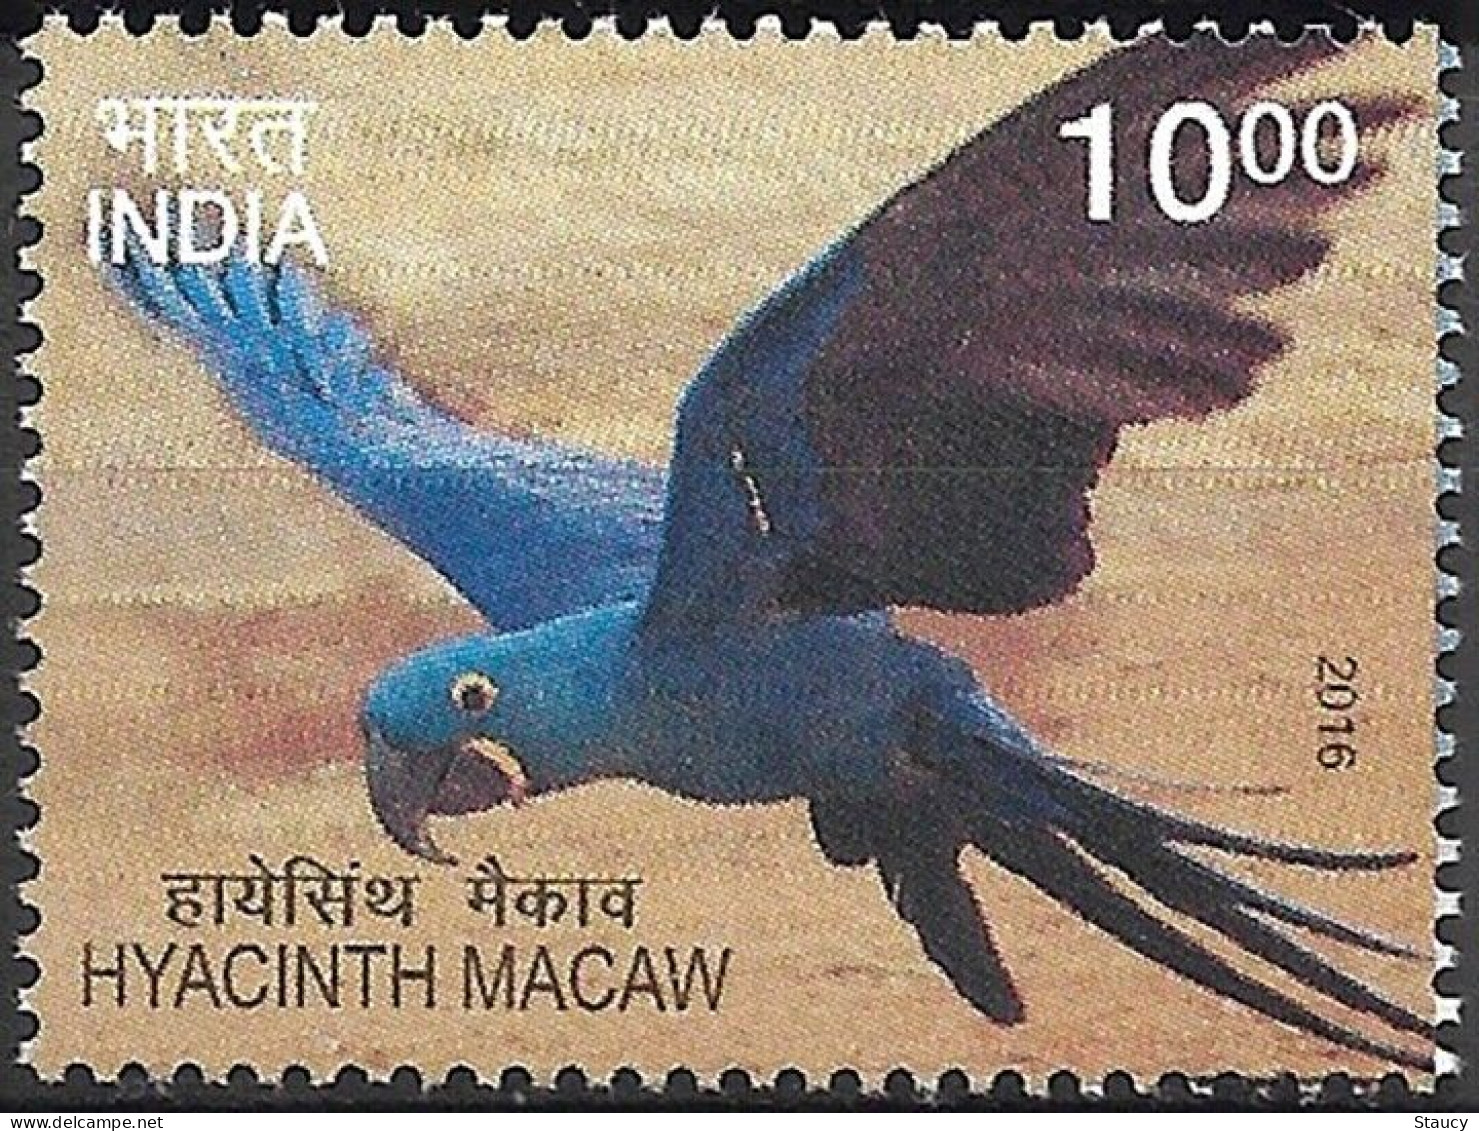 India 2016 Exotic Birds 1v Stamp MNH Macaw Parrot Amazon Crested, HYACINTH MACAW As Per Scan - Ungebraucht